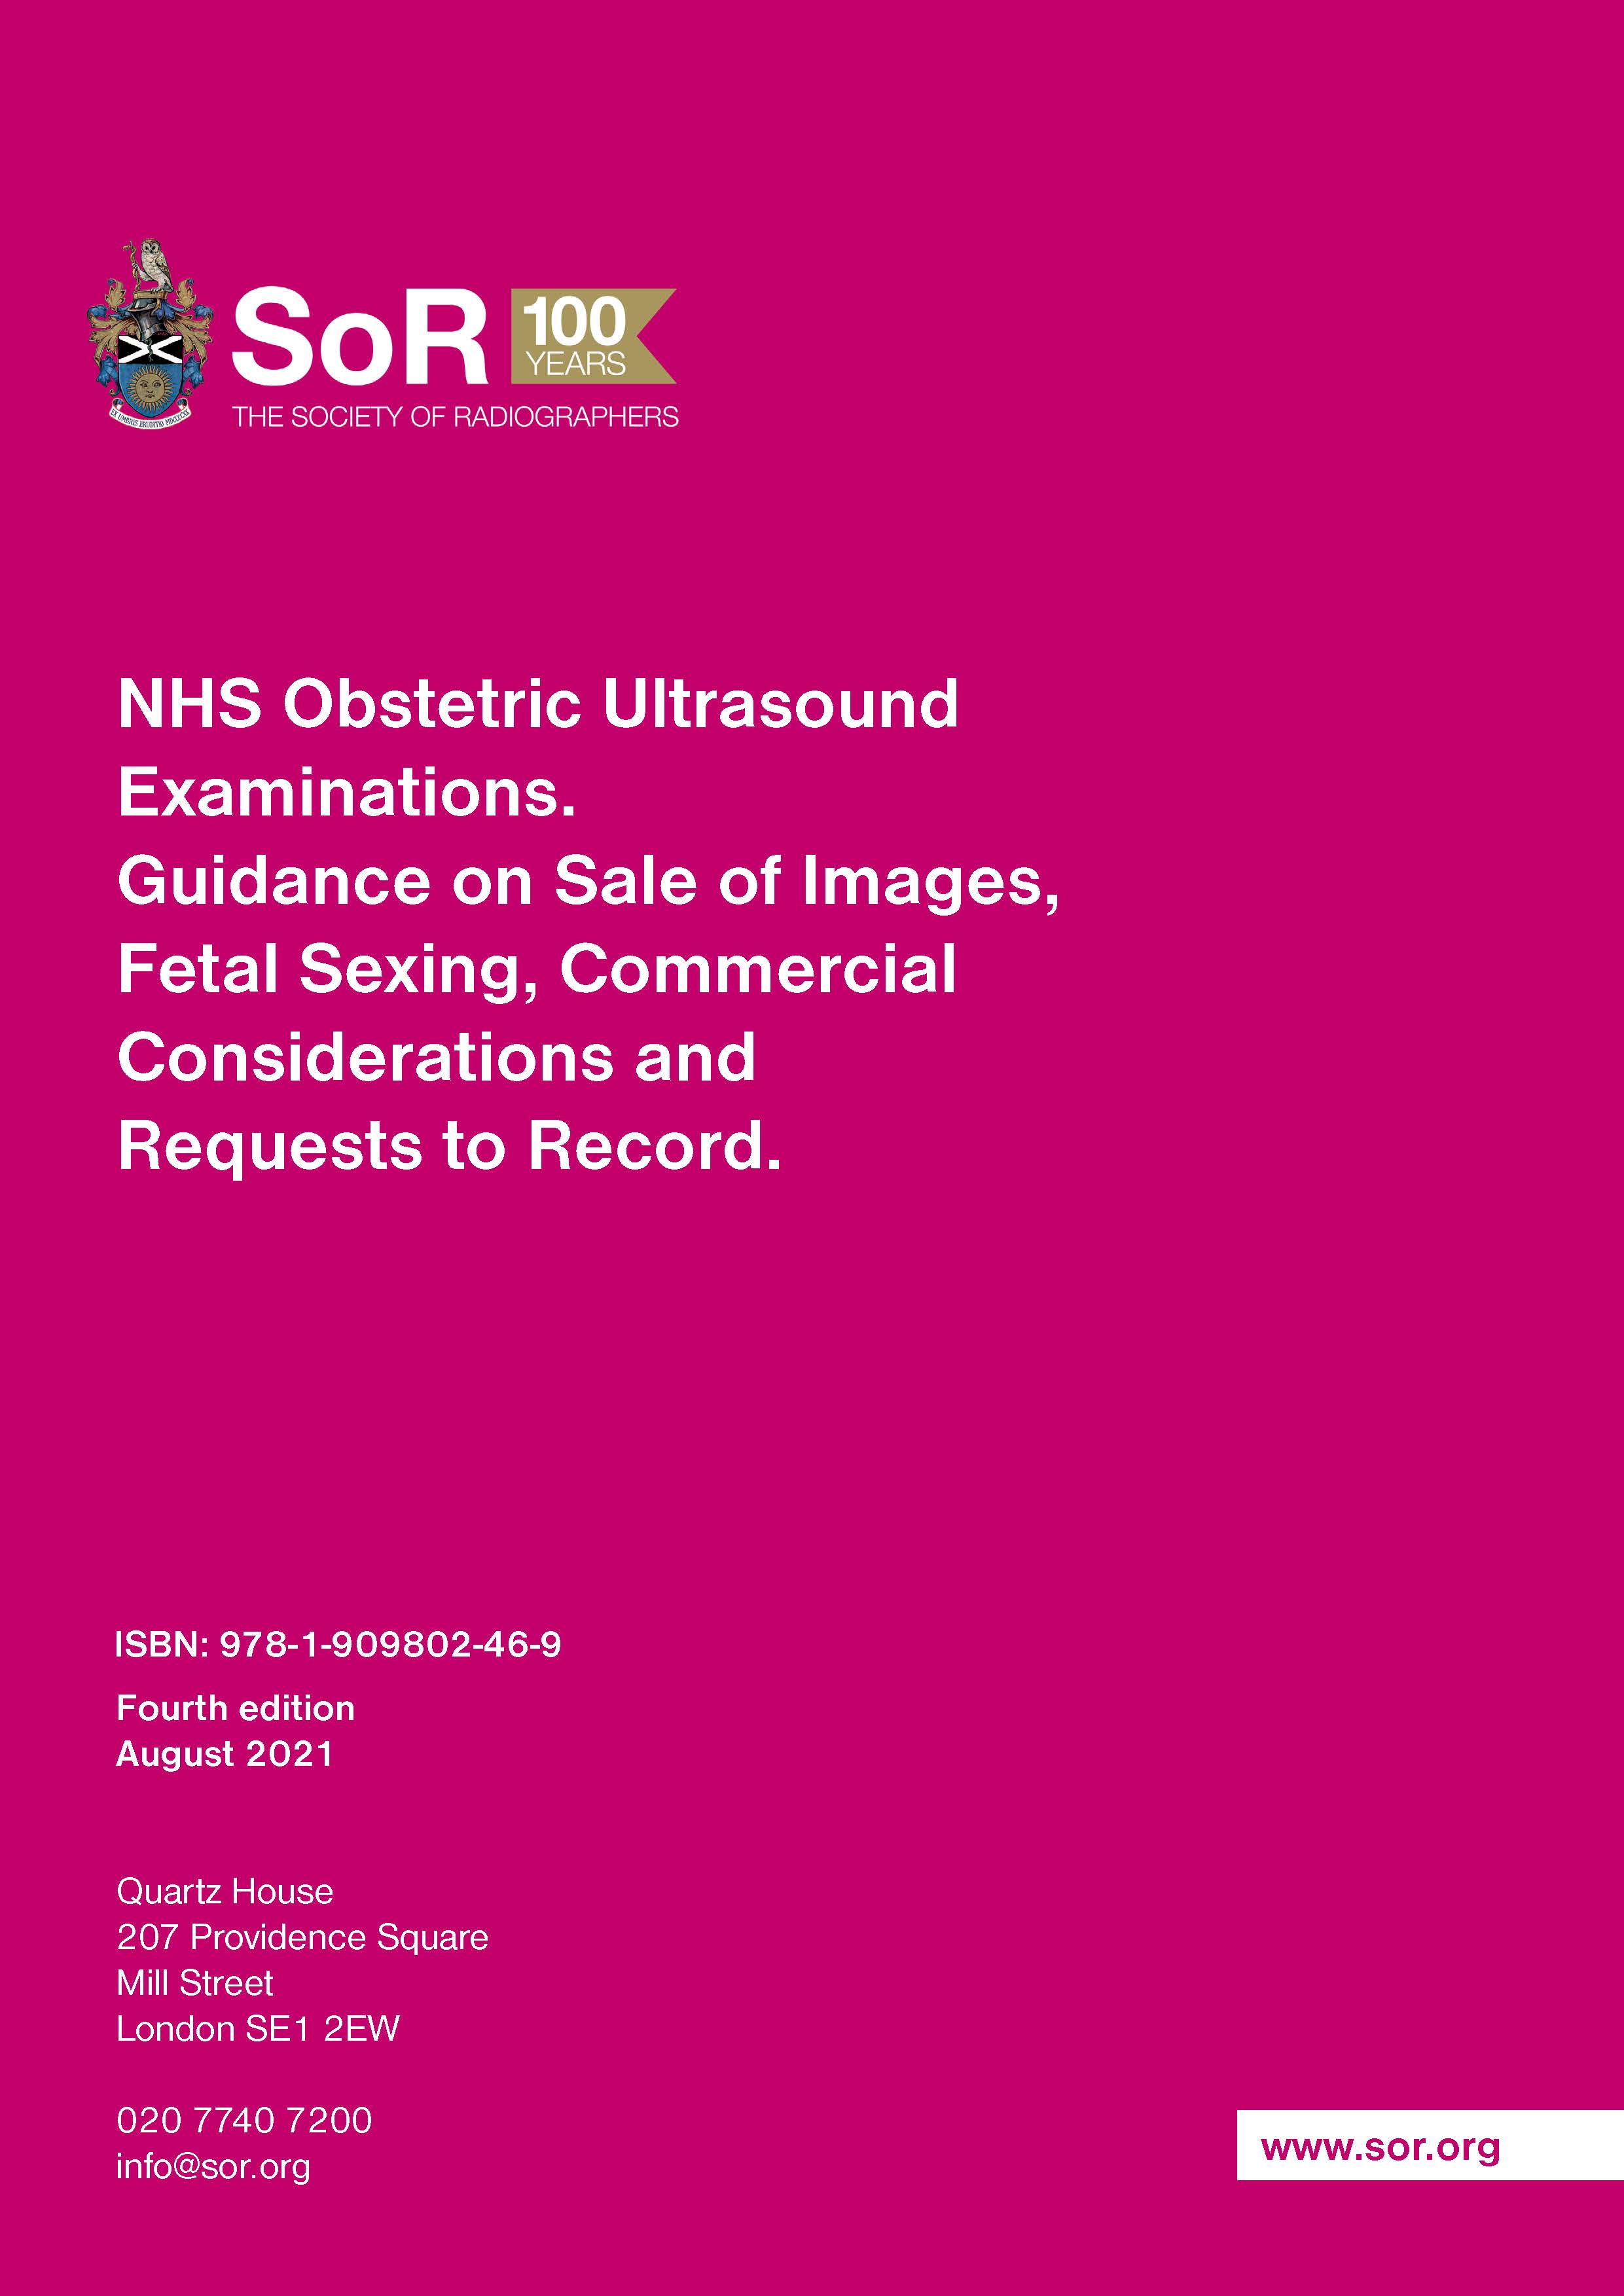 NHS Obstetric Ultrasound Examinations: Guidance on Sale of Images, Fetal Sexing, Commercial Considerations and Requests to Record.